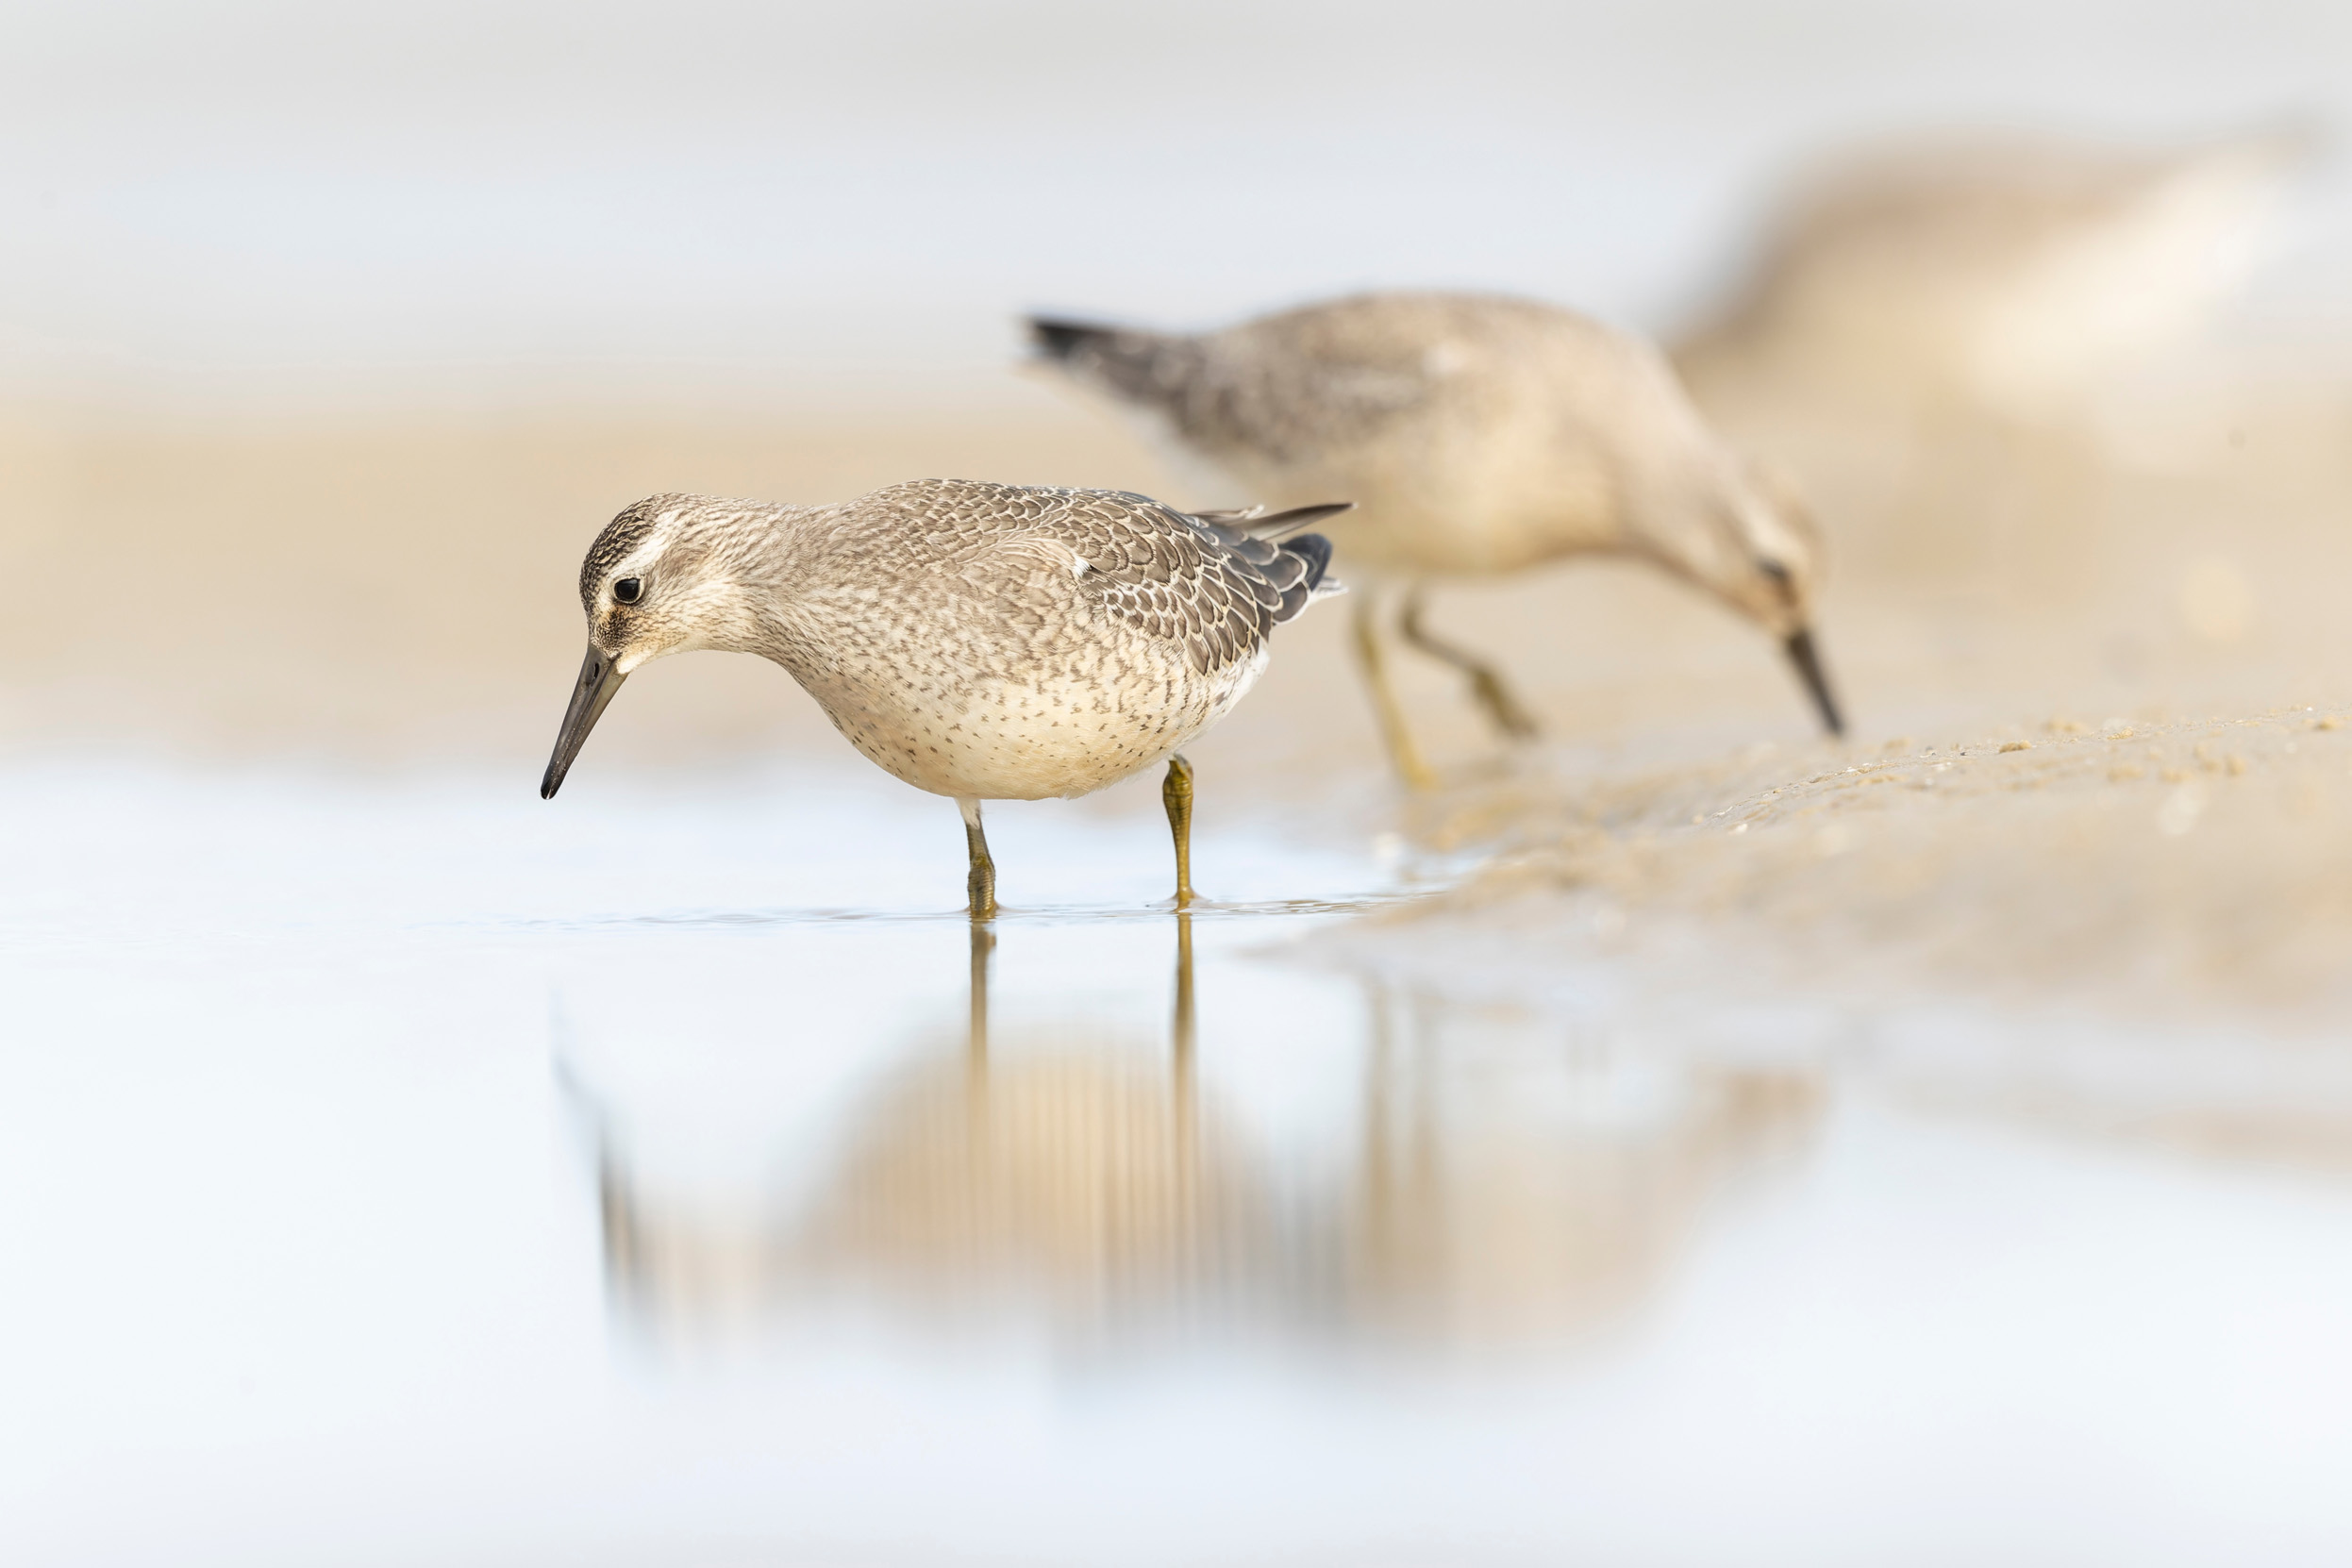 A pair of Red Knots in winter plumage hunting in shallow water.